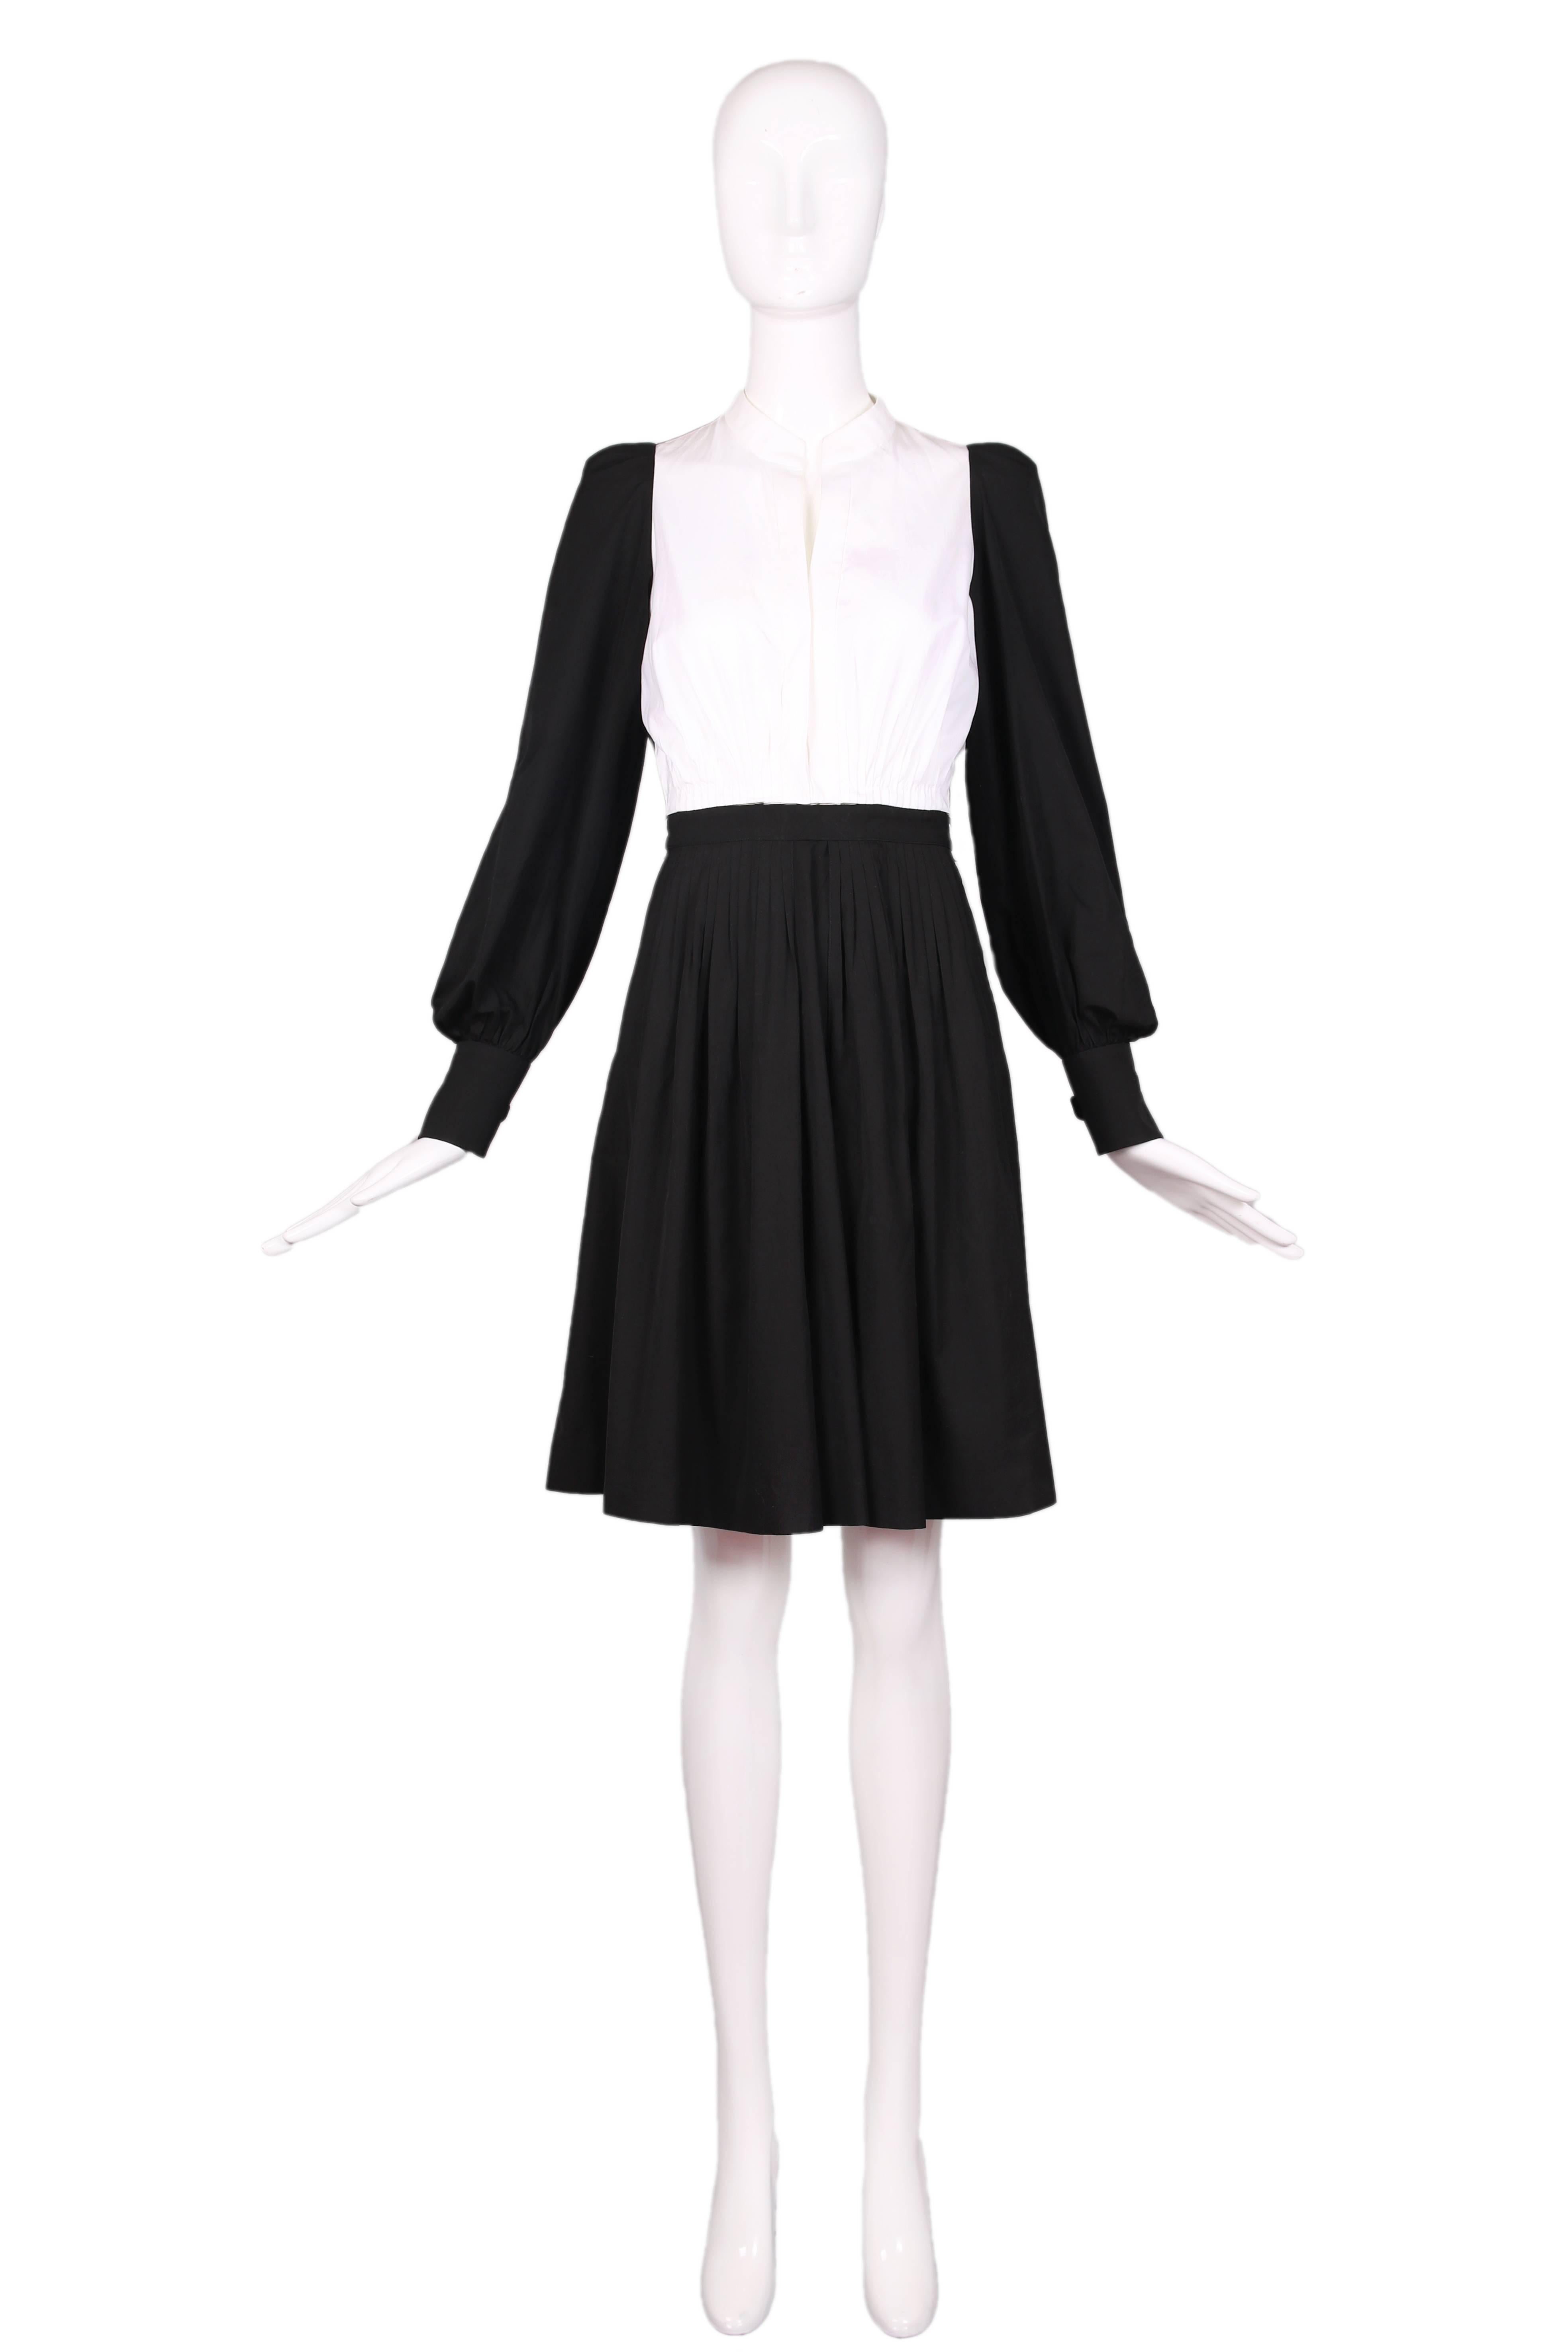 Yves Saint Laurent black and white color block cotton dress with pleating at waistline (both at skirt and blouse) and attached waist tie. In excellent condition. 
MEASUREMENTS (in inches):
Bust - 36
Waist - (approx.) 28
Hip - Free
Length - 38
